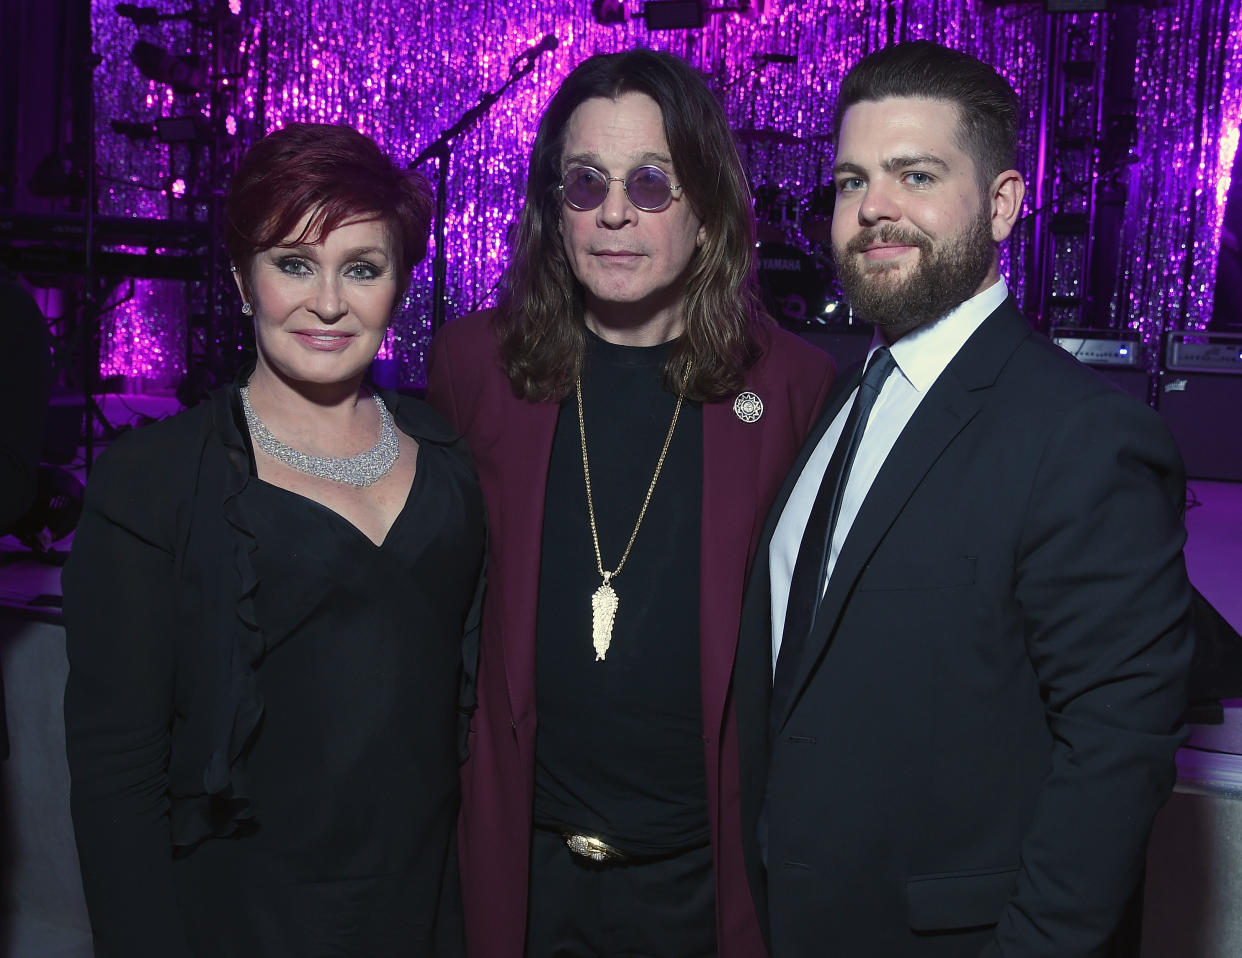 Sharon Osbourne, musician Ozzy Osbourne, and Jack Osbourne attend the 23rd Annual Elton John AIDS Foundation Academy Awards Viewing Party on February 22, 2015 in Los Angeles, California.  (Photo by Dimitrios Kambouris/Getty Images  for EJAF)